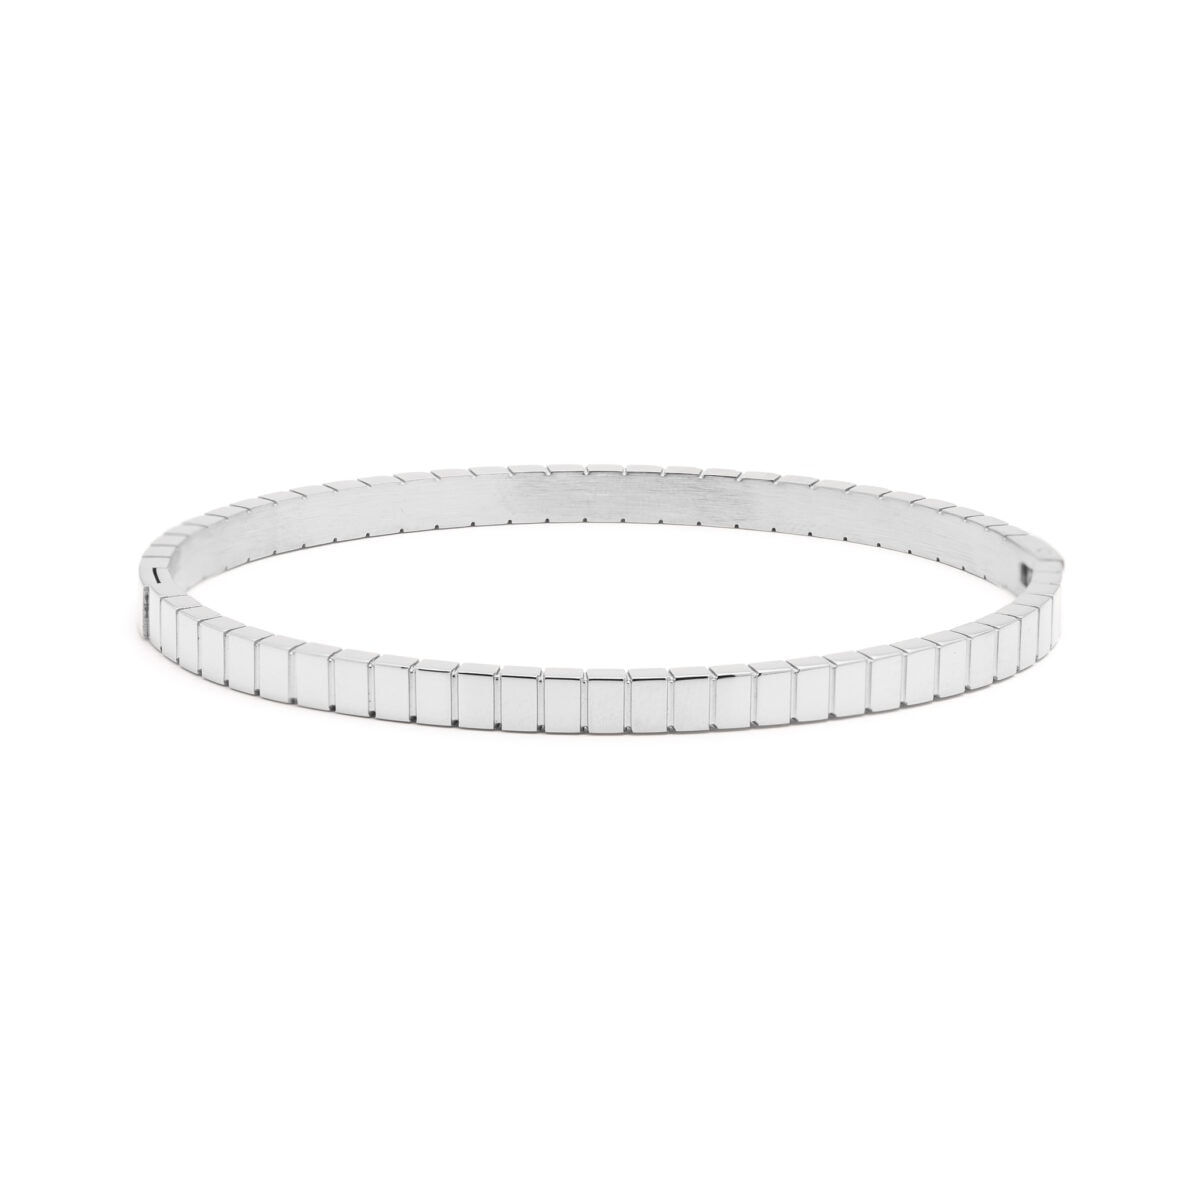 https://m.clubbella.co/product/ice-cube-silver-bangle/ Ice Cube Bangle Silver (2)